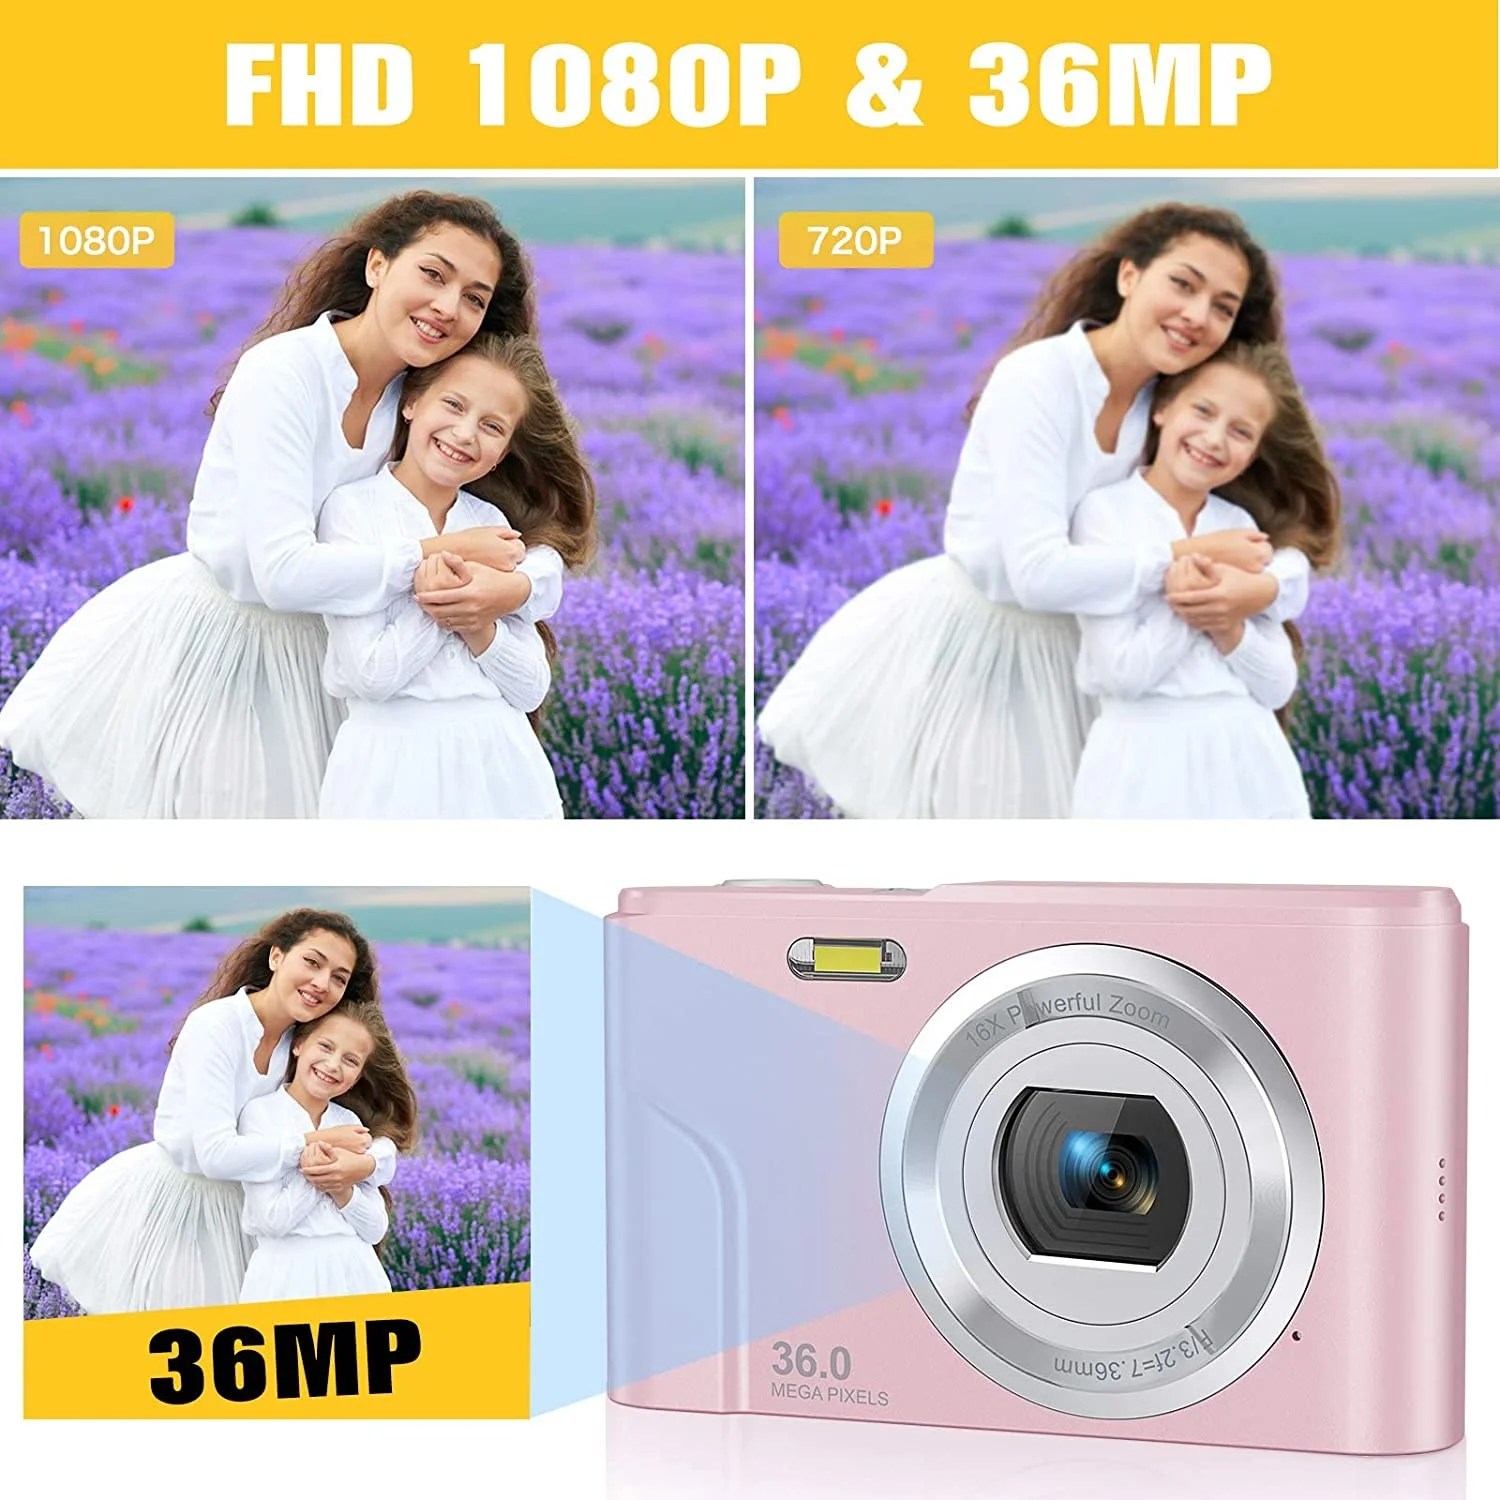 Digital Camera 48.0MP Vlogging Camera 16X Digital Zoom LCD Screen Compact Portable Mini Cameras for Students Teens Recommend enlarge